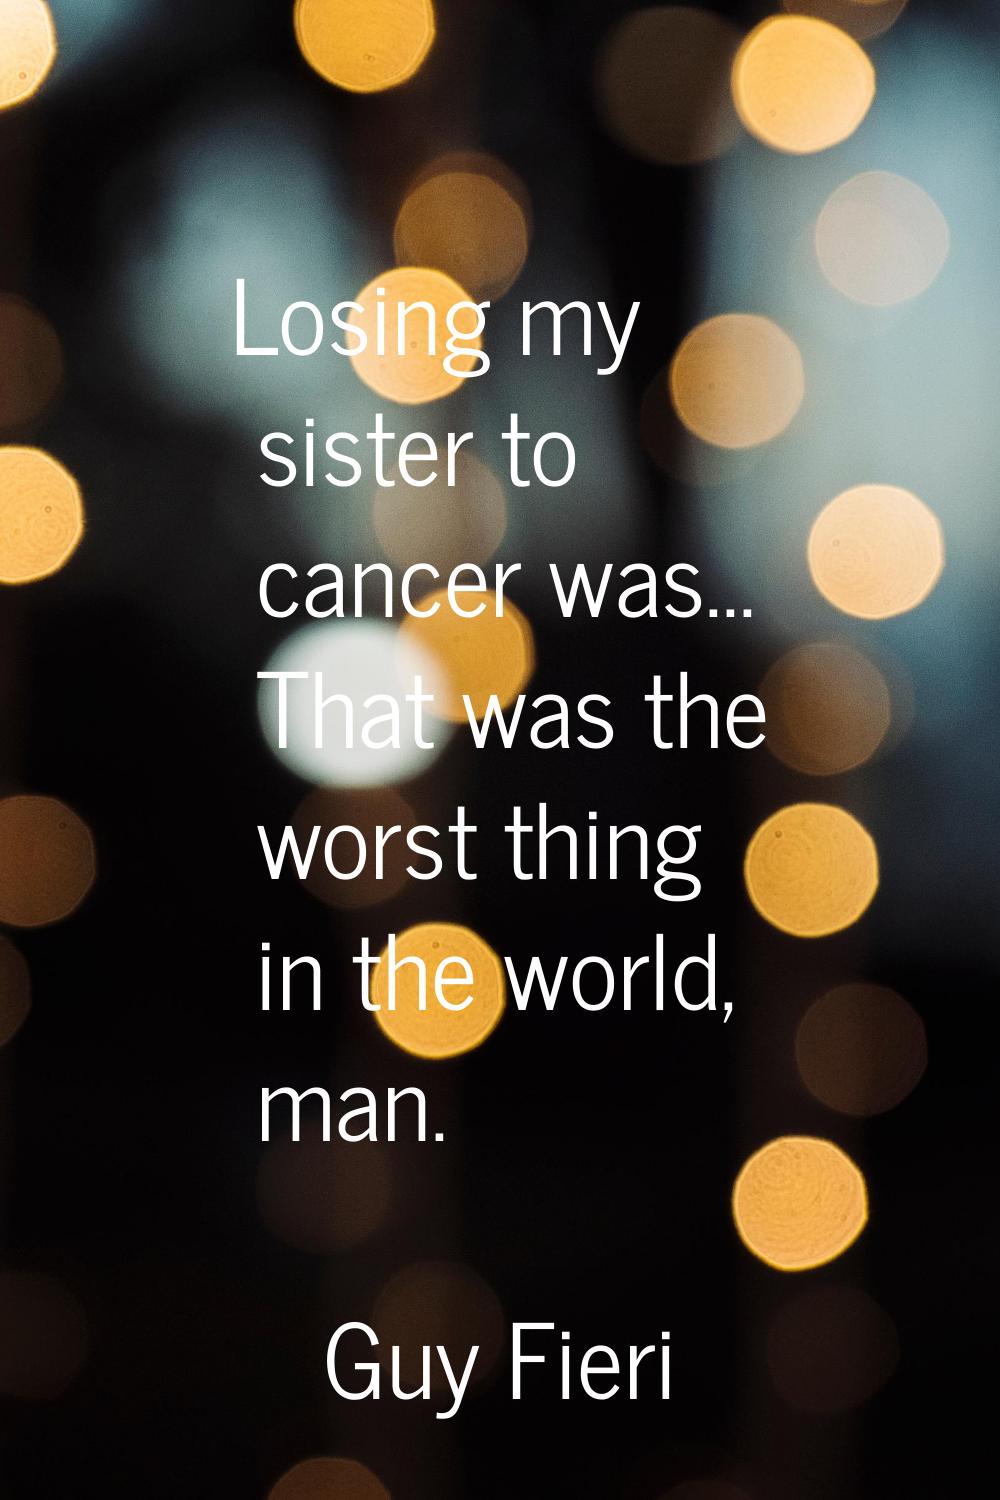 Losing my sister to cancer was... That was the worst thing in the world, man.